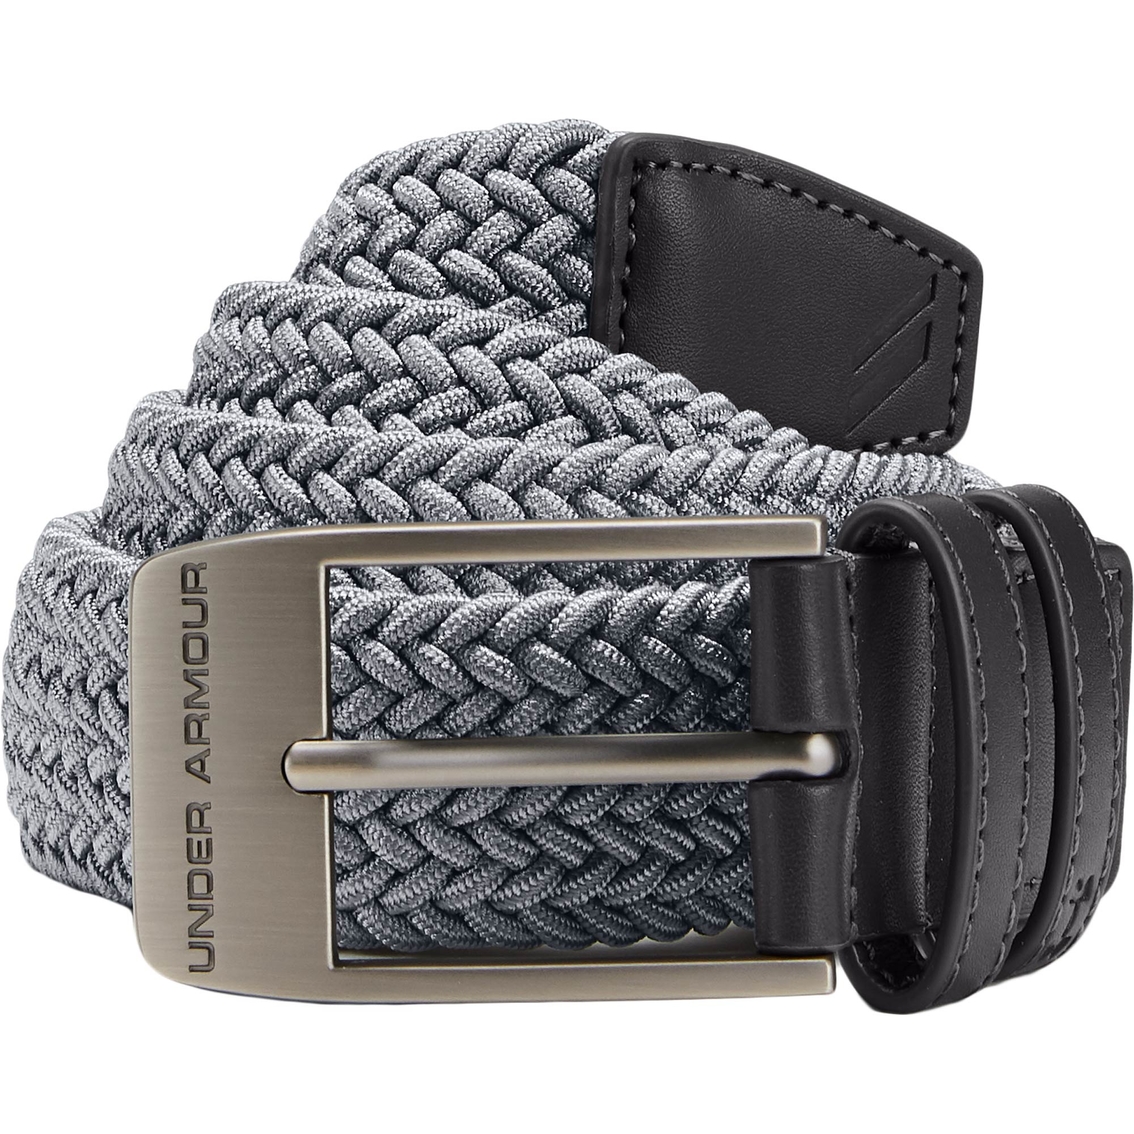 Under Armour Braided 2.0 Belt, Belts, Clothing & Accessories